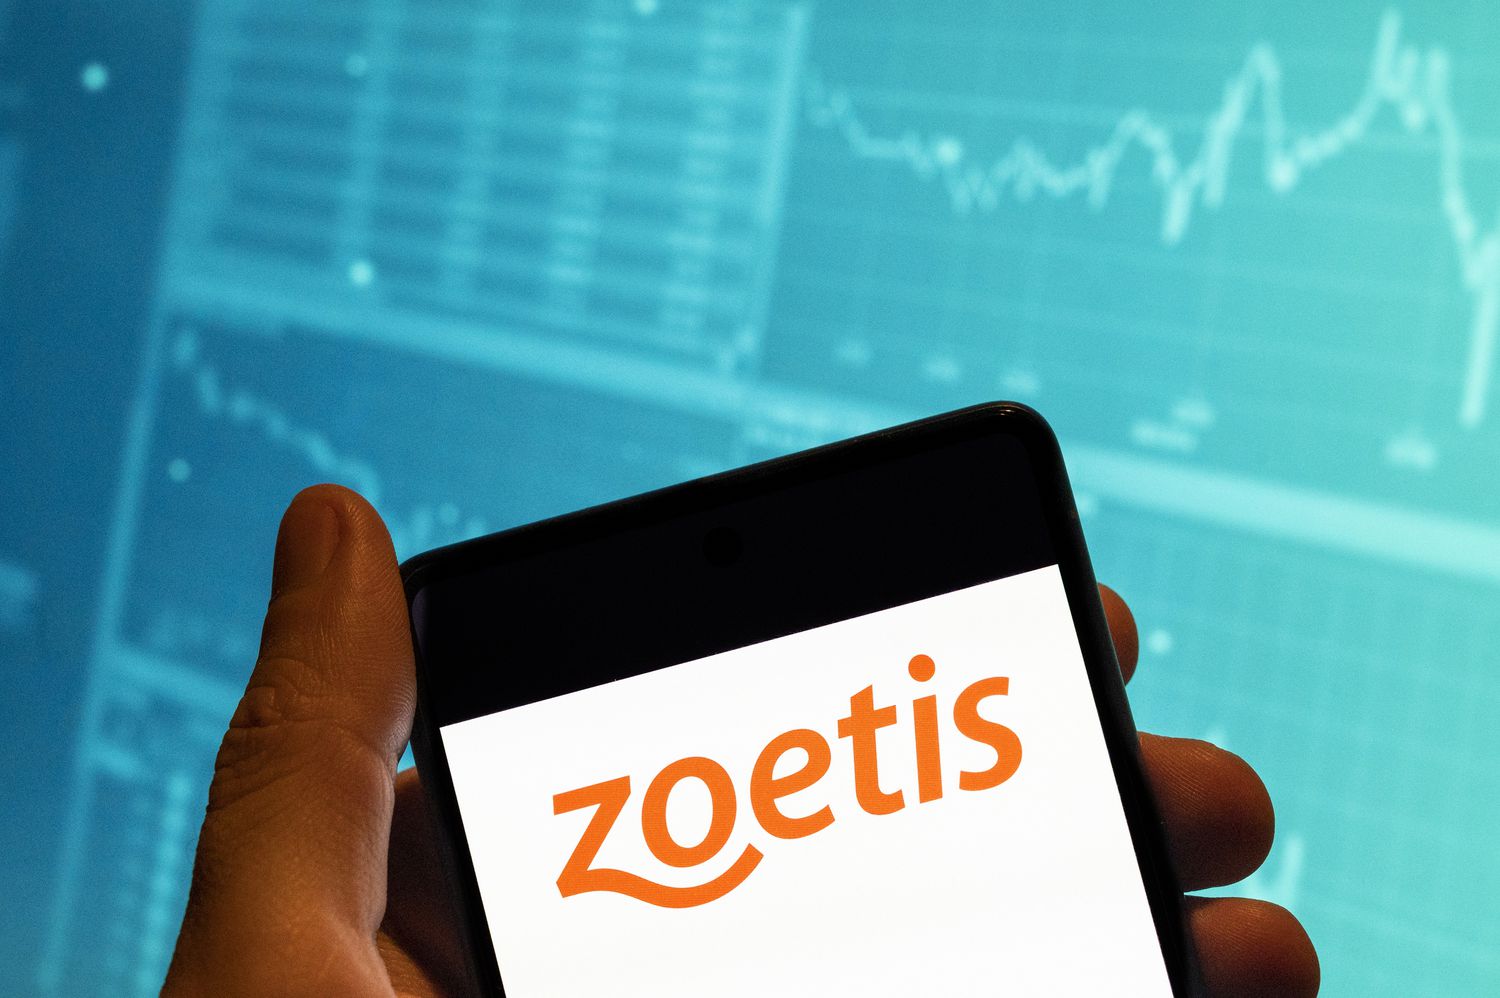 Zoetis Stock Slumps on Report Suggesting Its Arthritis Drugs May Make Pets Sick [Video]